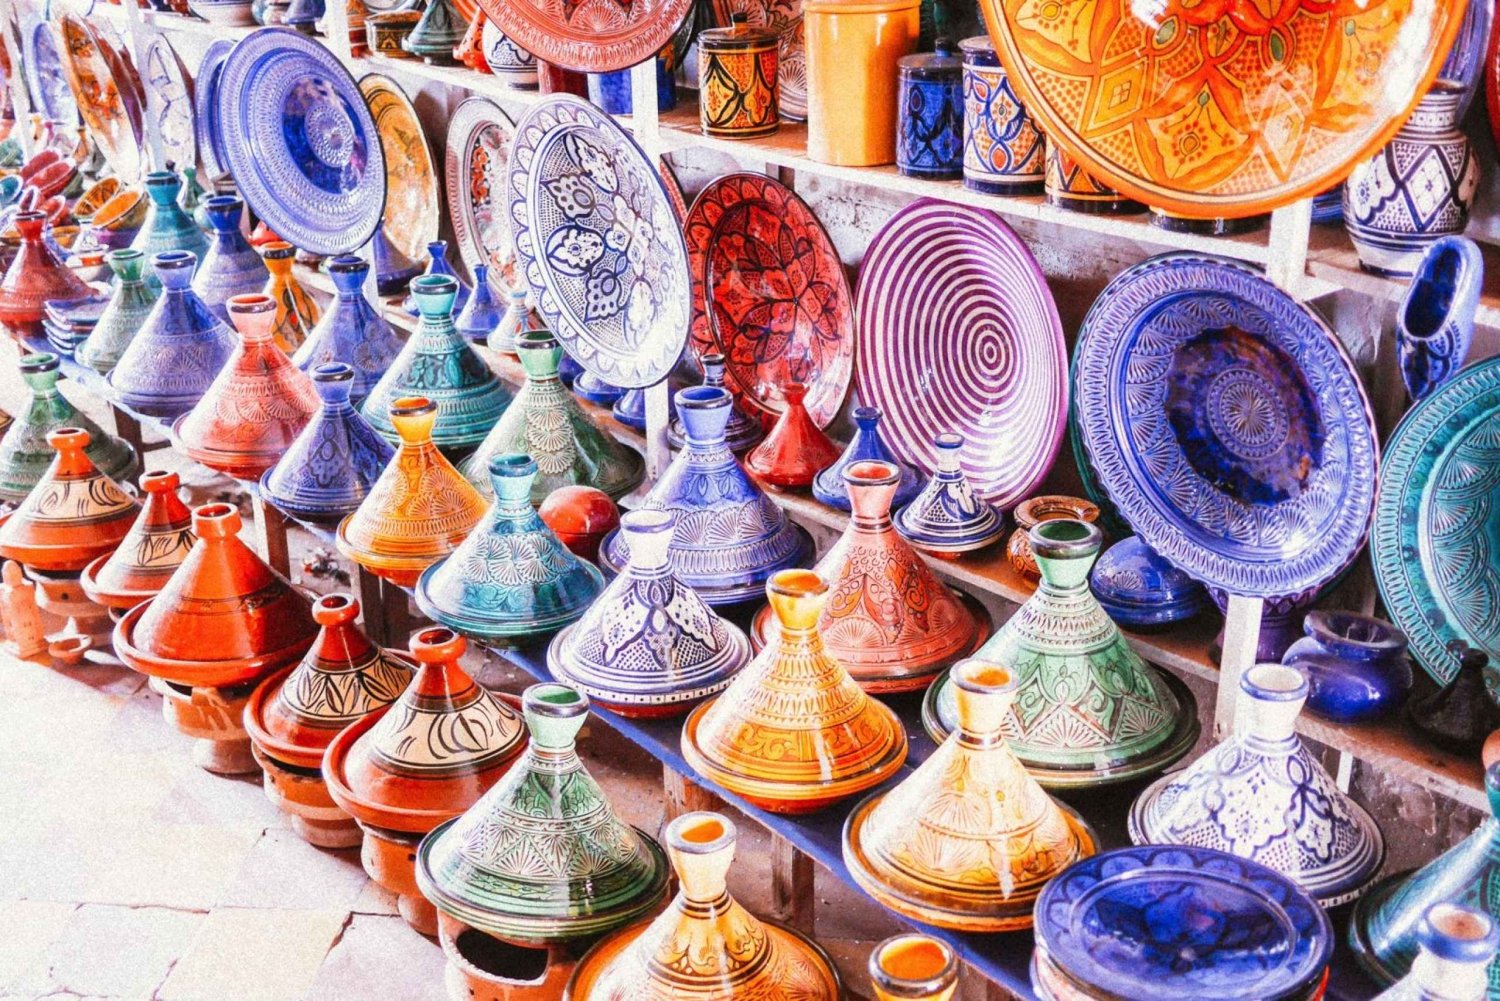 Marrakesh: Private Shopping Tour & Lunch in The Old Medina